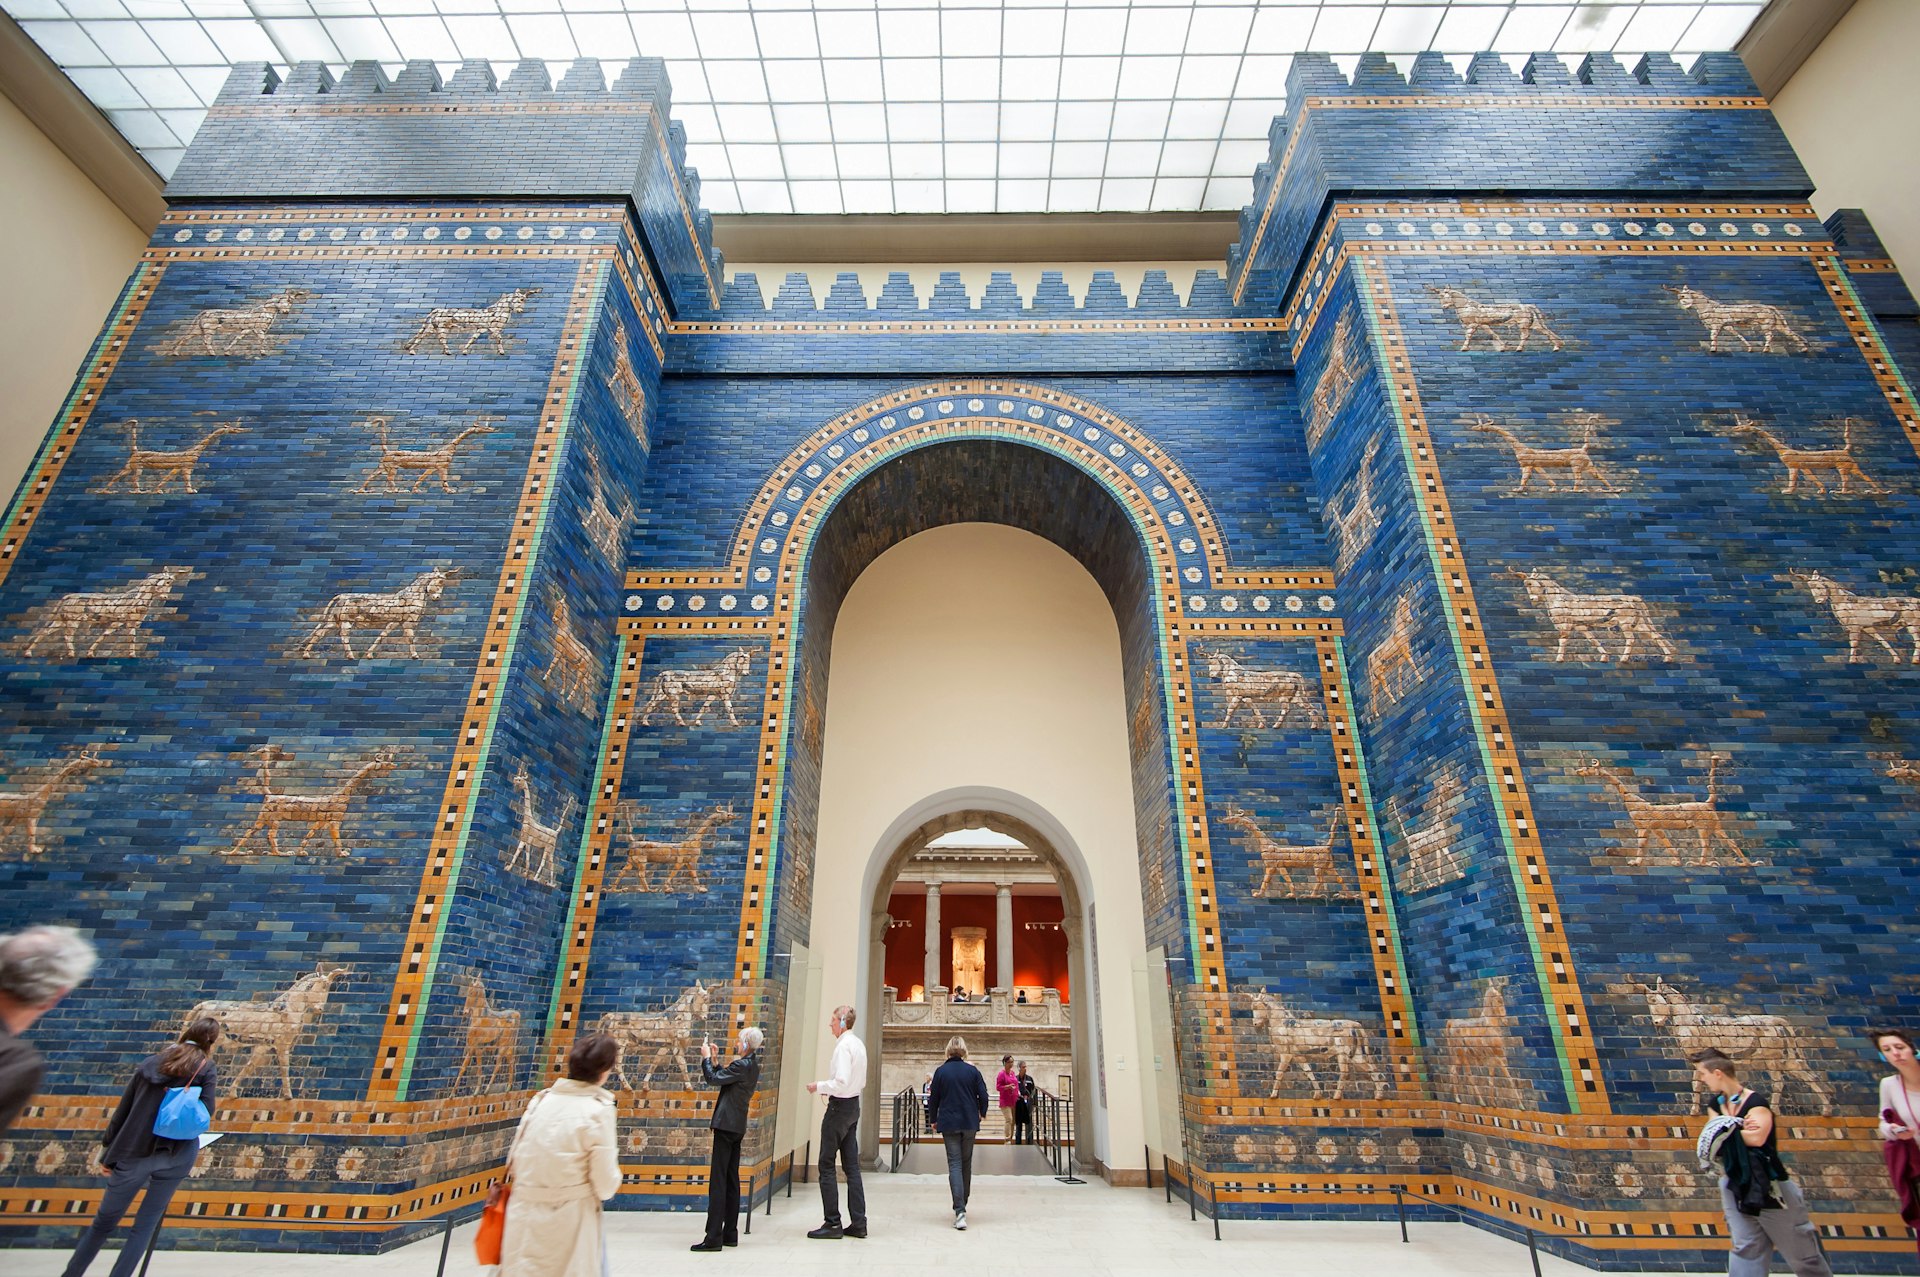 Visitors walk by or stand in front of bright blue walls of Babylonian city inside the Pergamon museum.